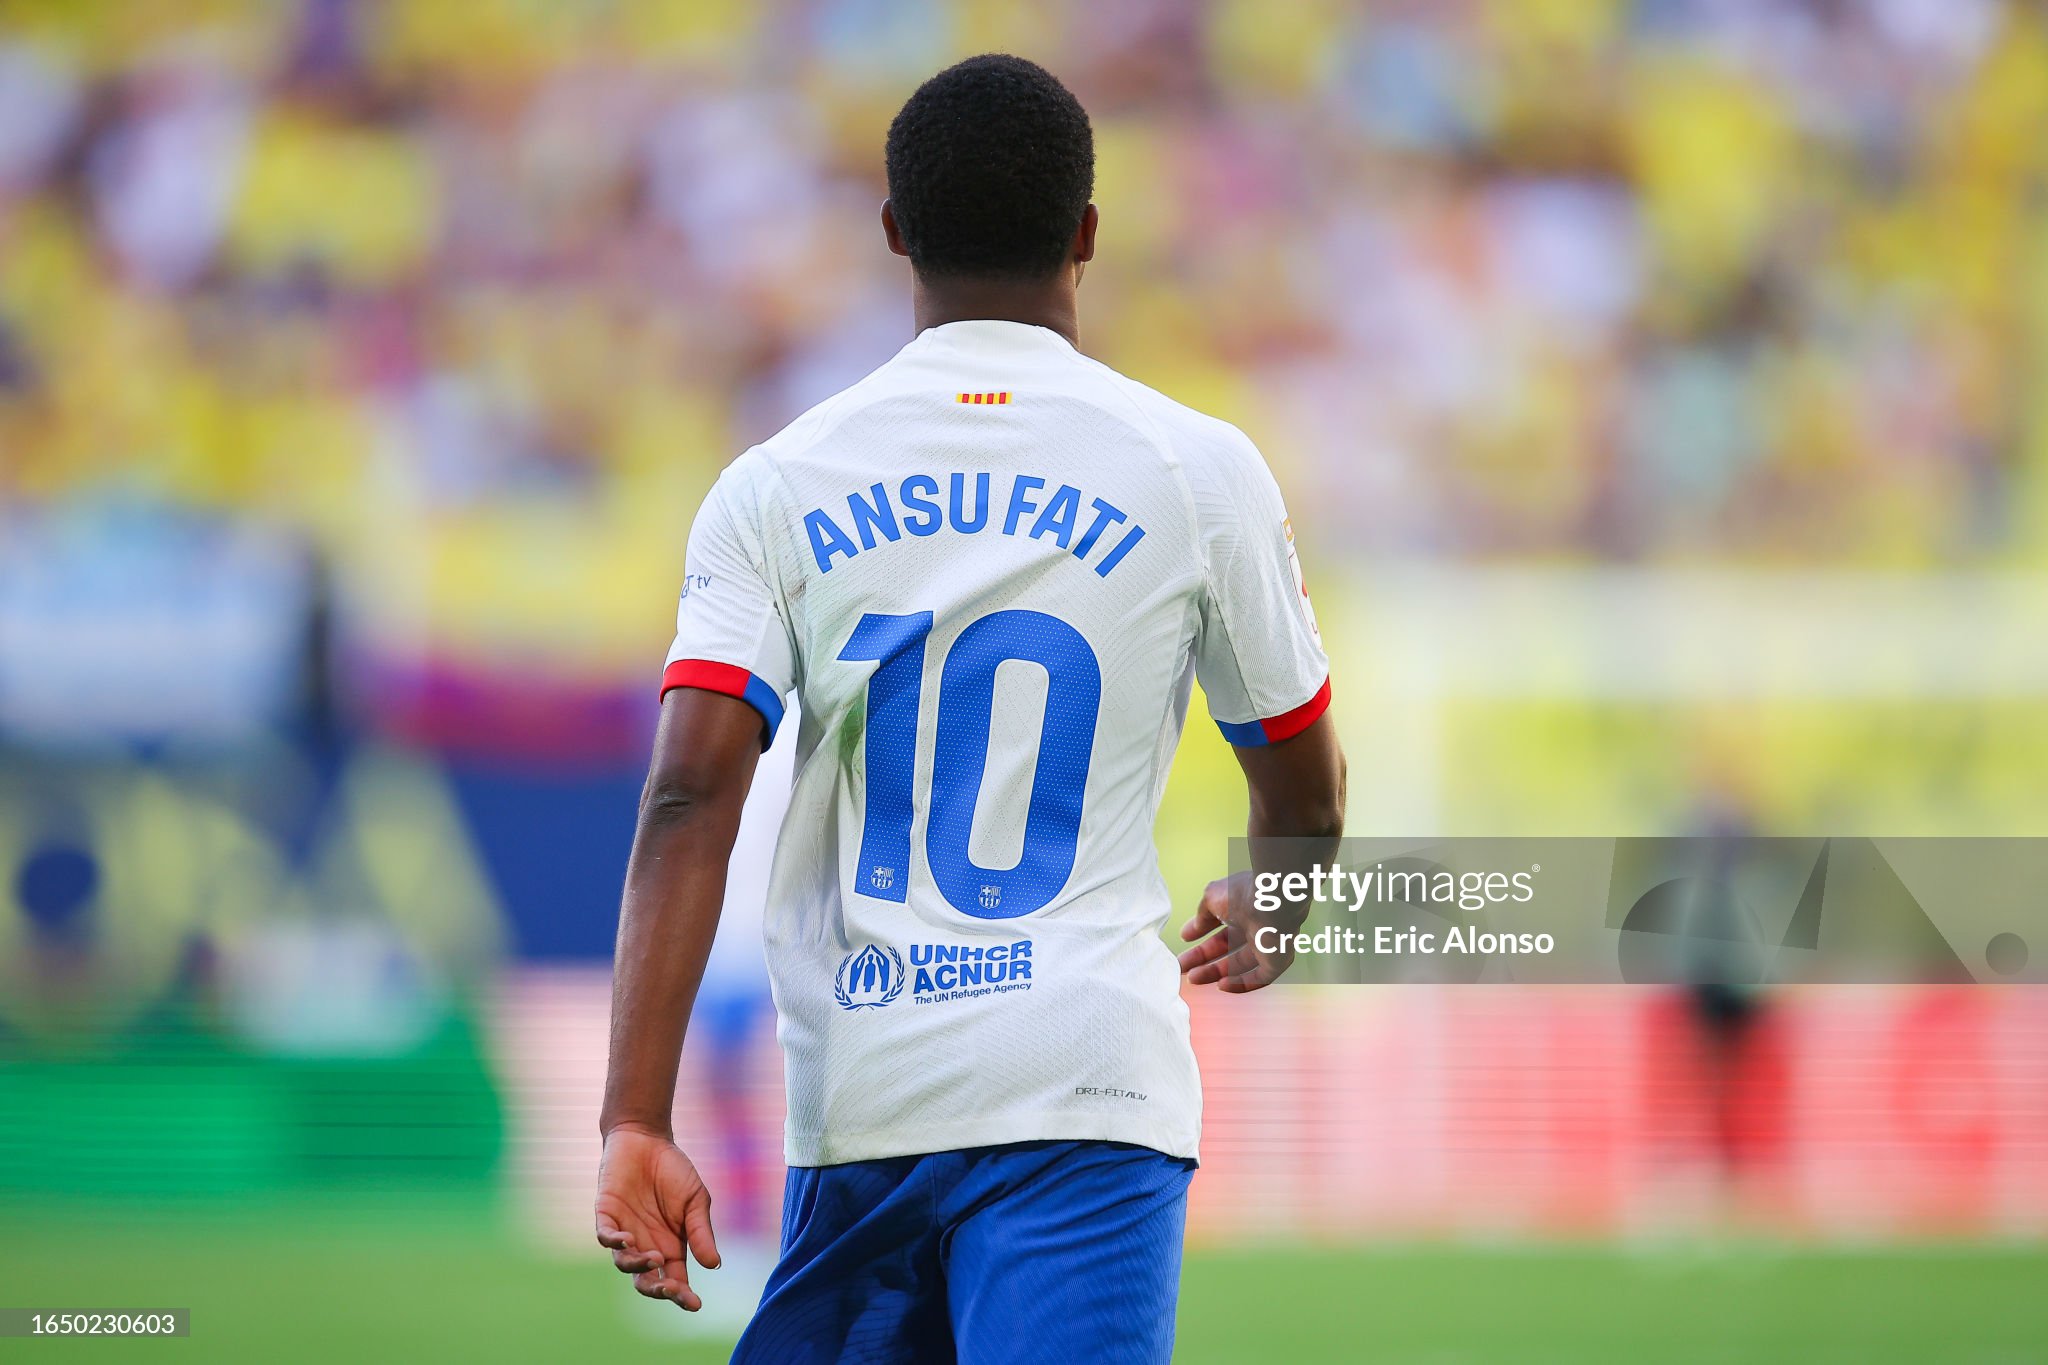 Barcelona winger Ansu Fati set to earn over 0k-a-week at Brighton